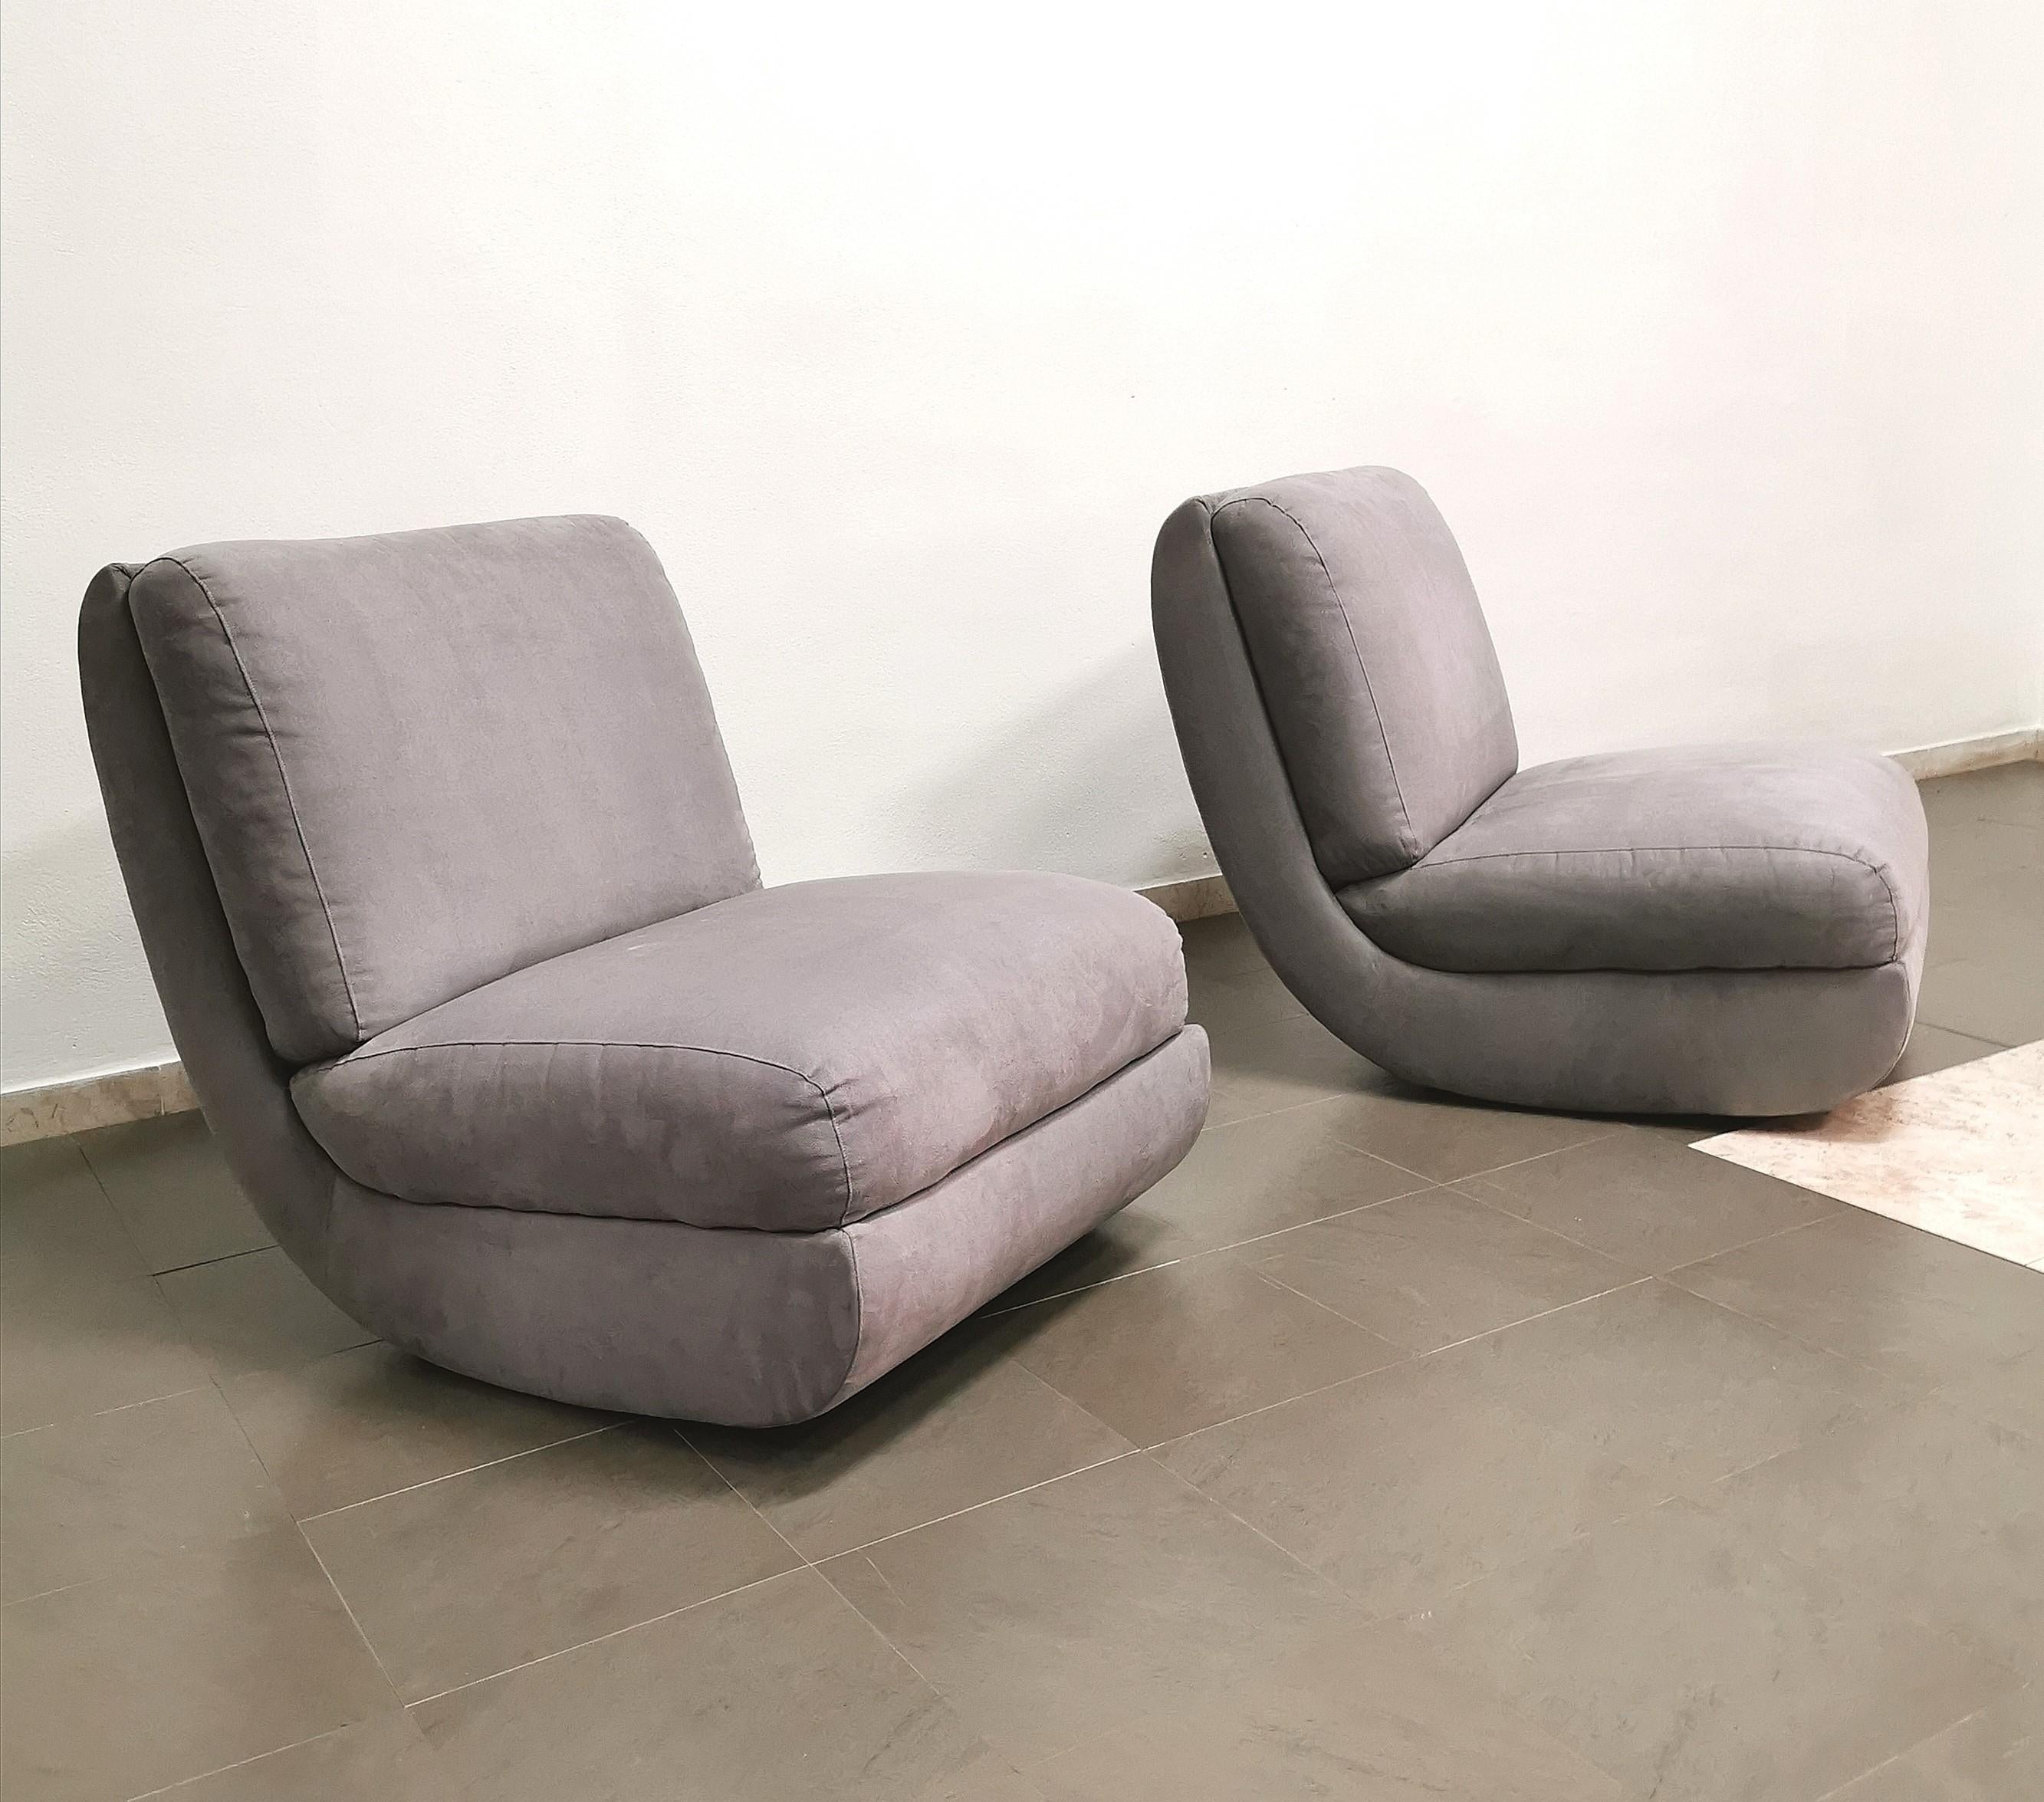 Set of 2 wonderful and rare armchairs with curvilinear shapes in smooth gray velvet with 4 hard plastic feet. Italian production from the 70s.